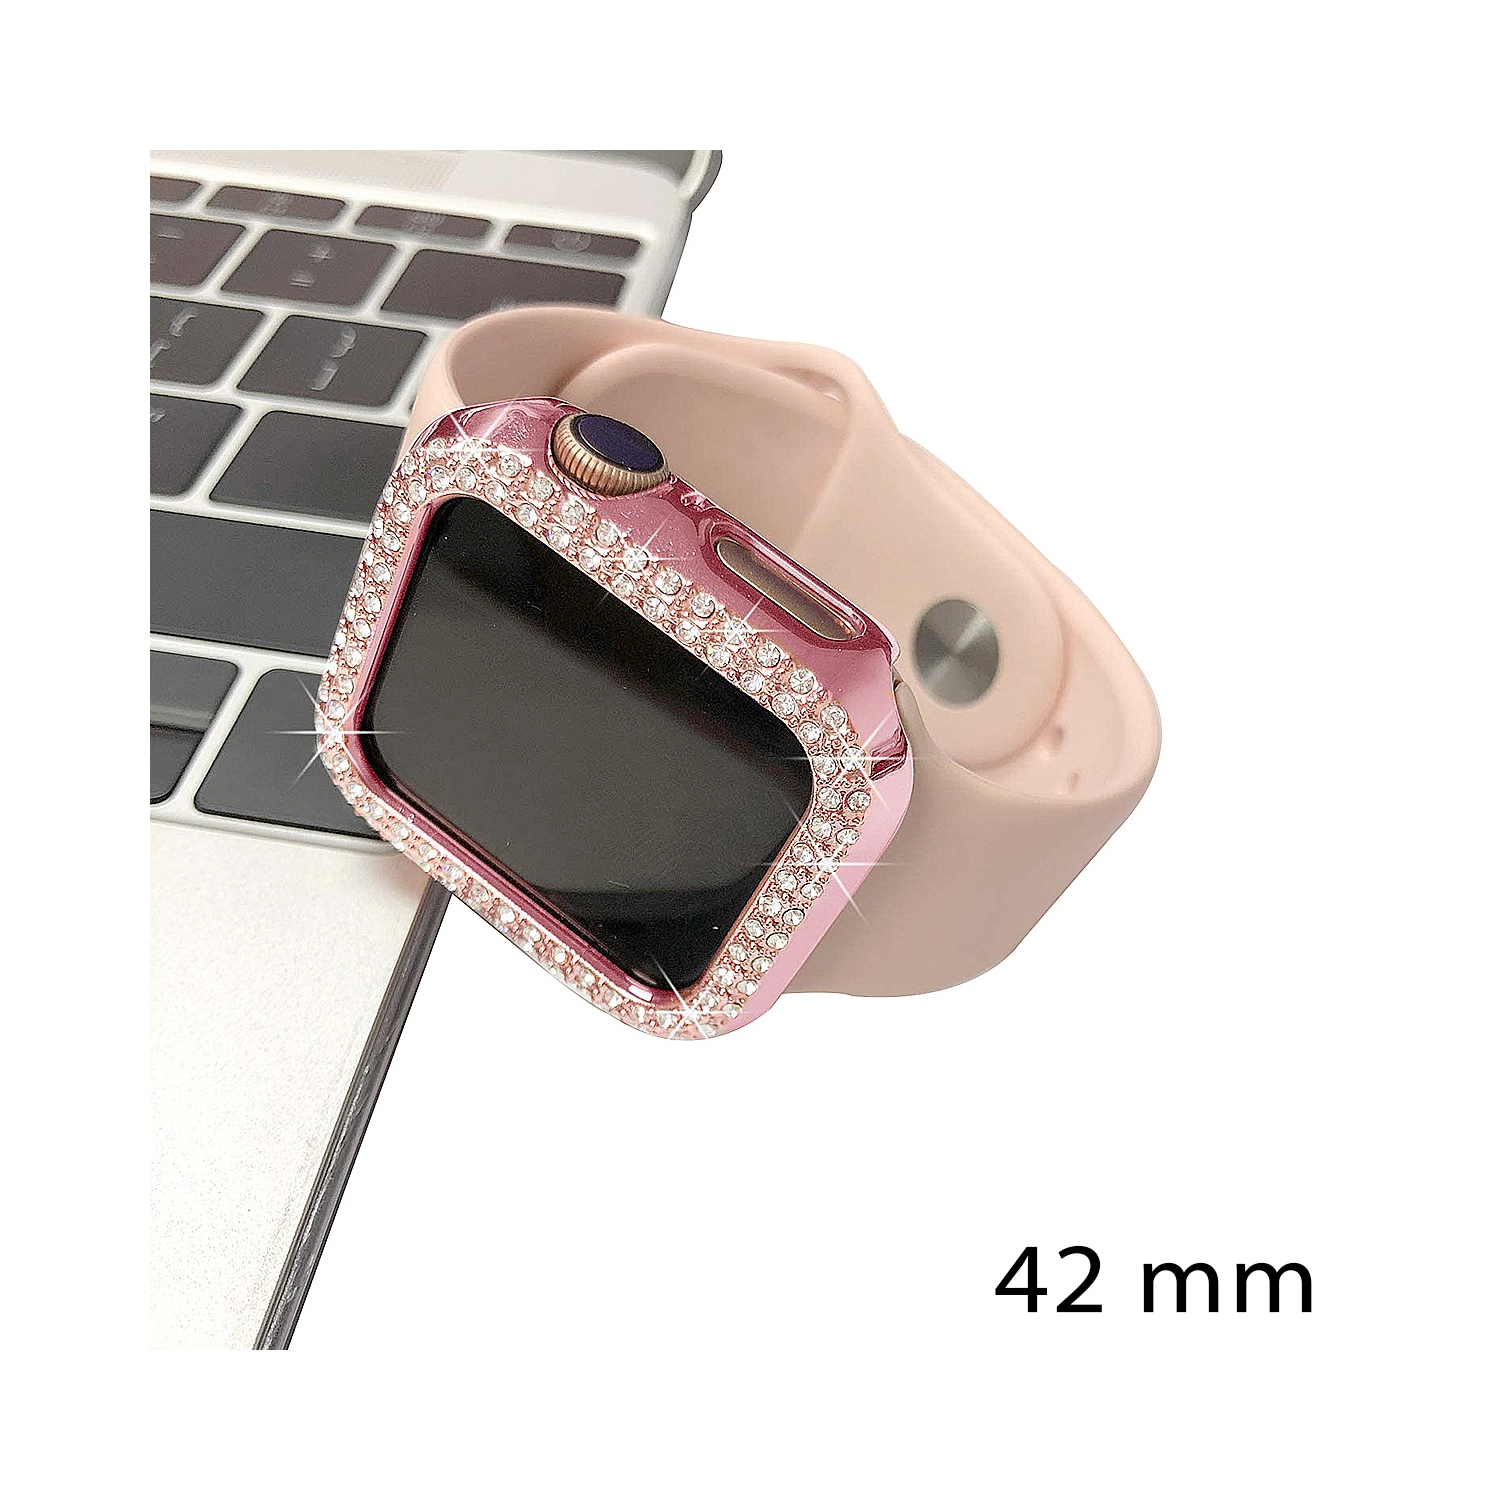 Crystal Diamond Design Bumper Case Body Protection Cover Watch Shell For Apple iWatch 42mm Series 1 / 2 / 3 - Rose Pink